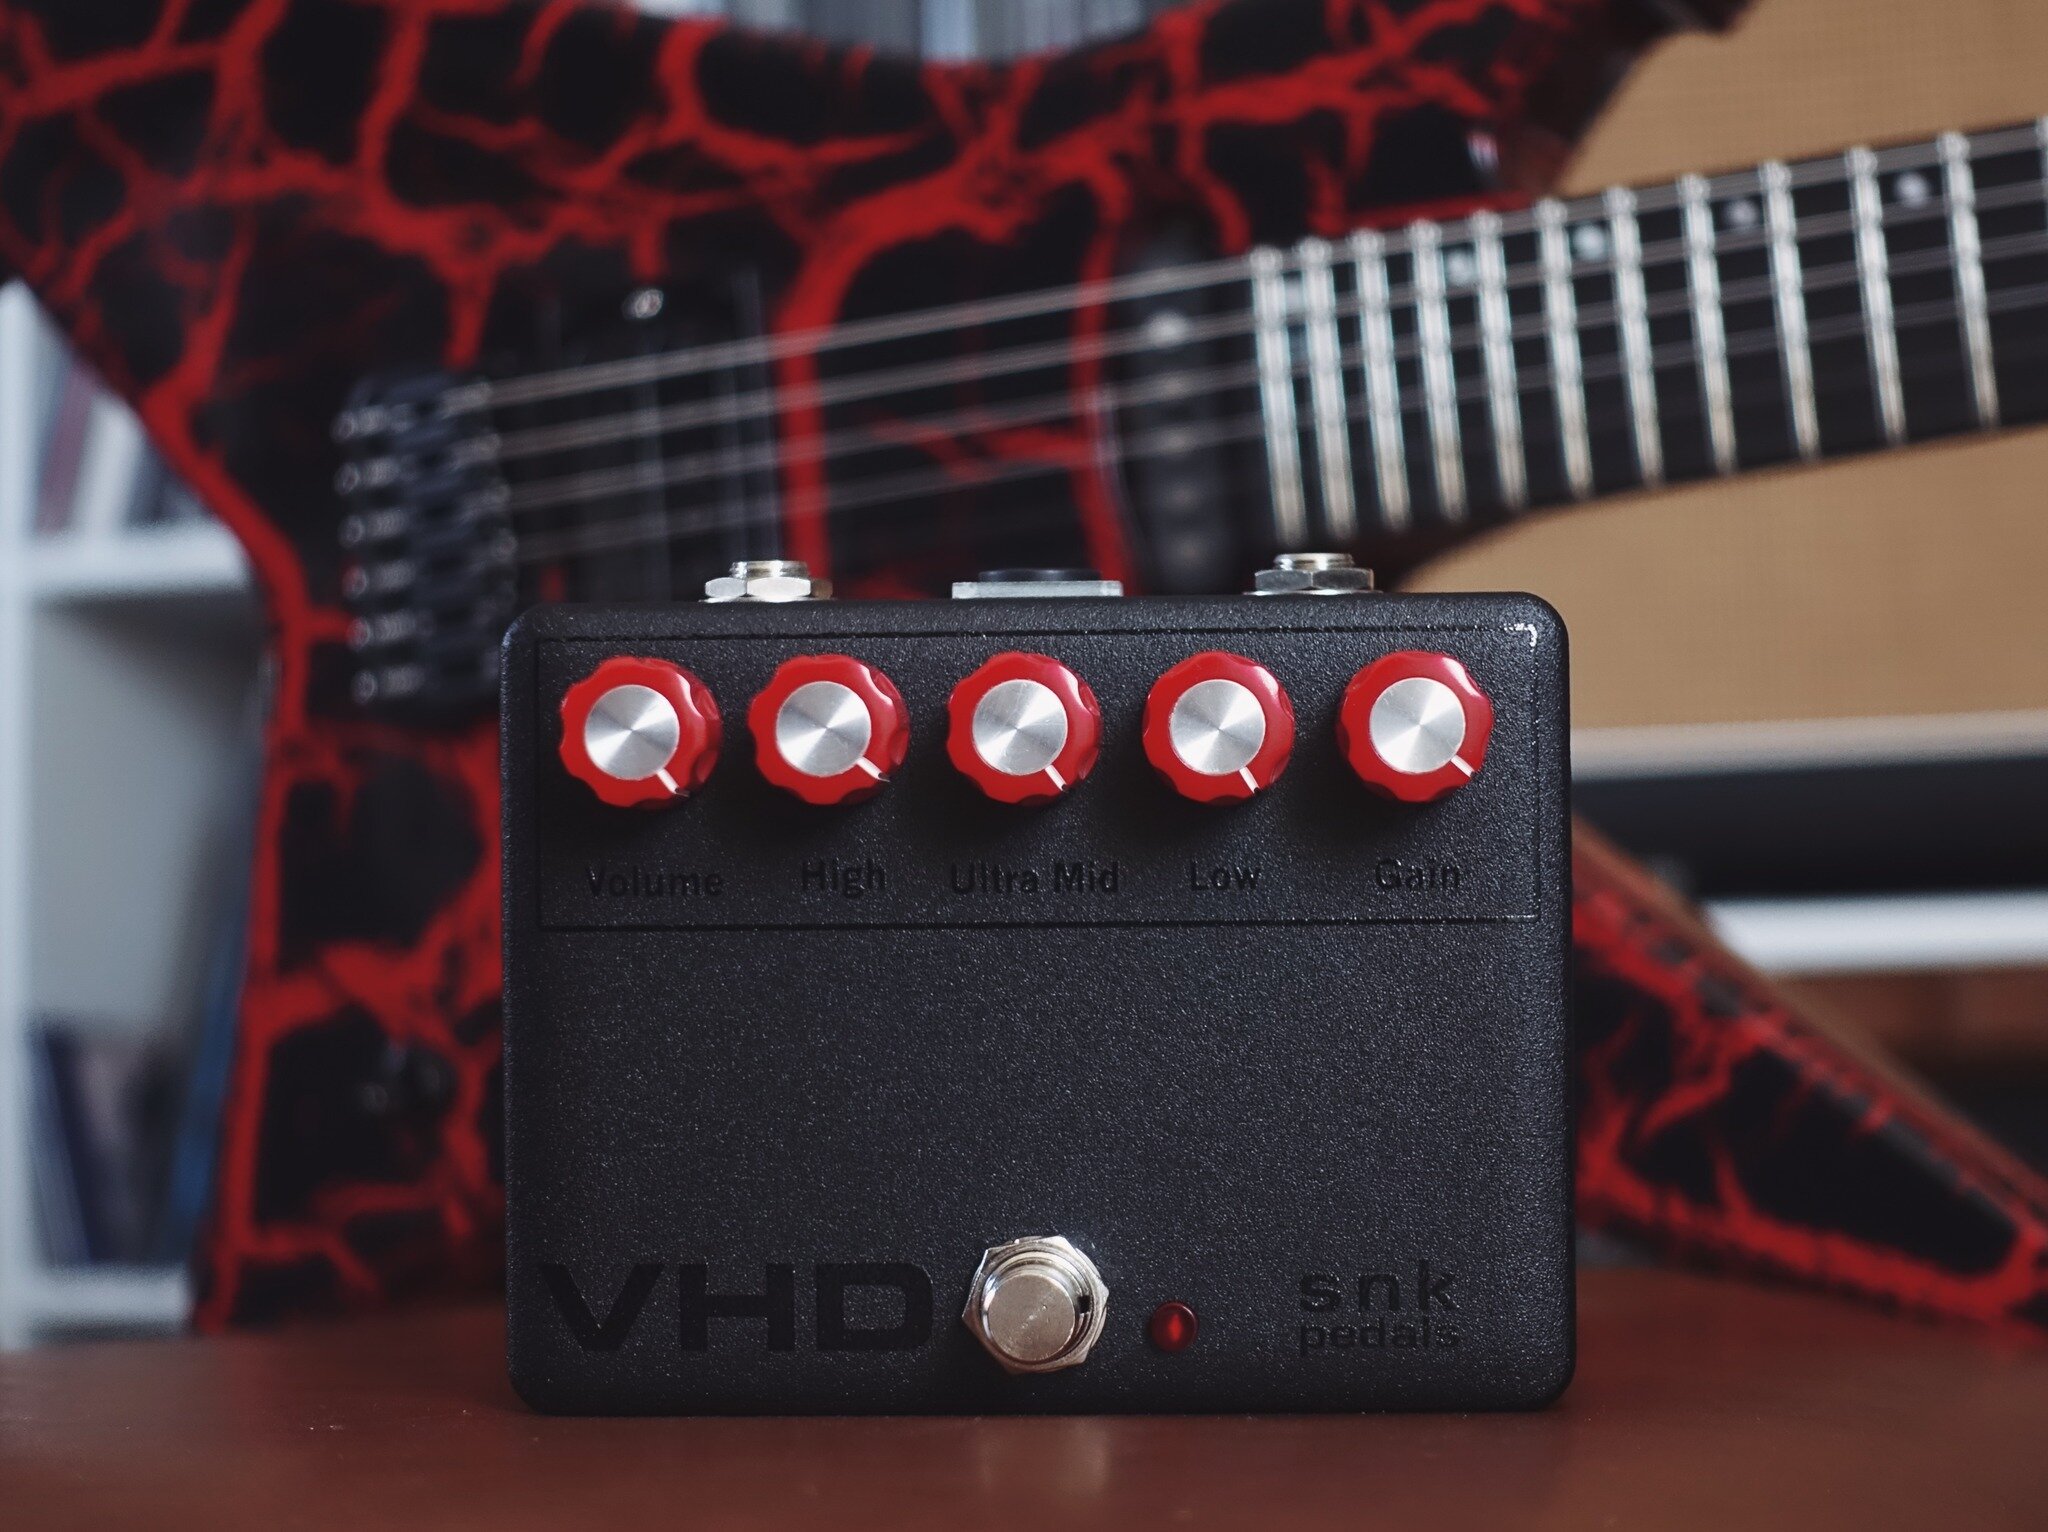 Tomorrow we are launching a limited Cult FX edition of the @snkpedals VHD in our exclusive black on black w/ red &amp; silver knobs finish.

Only 20 units made!

The VHD is a replication of the iconic Ampeg VH-140C preamp circuit and delivers 90s Dea